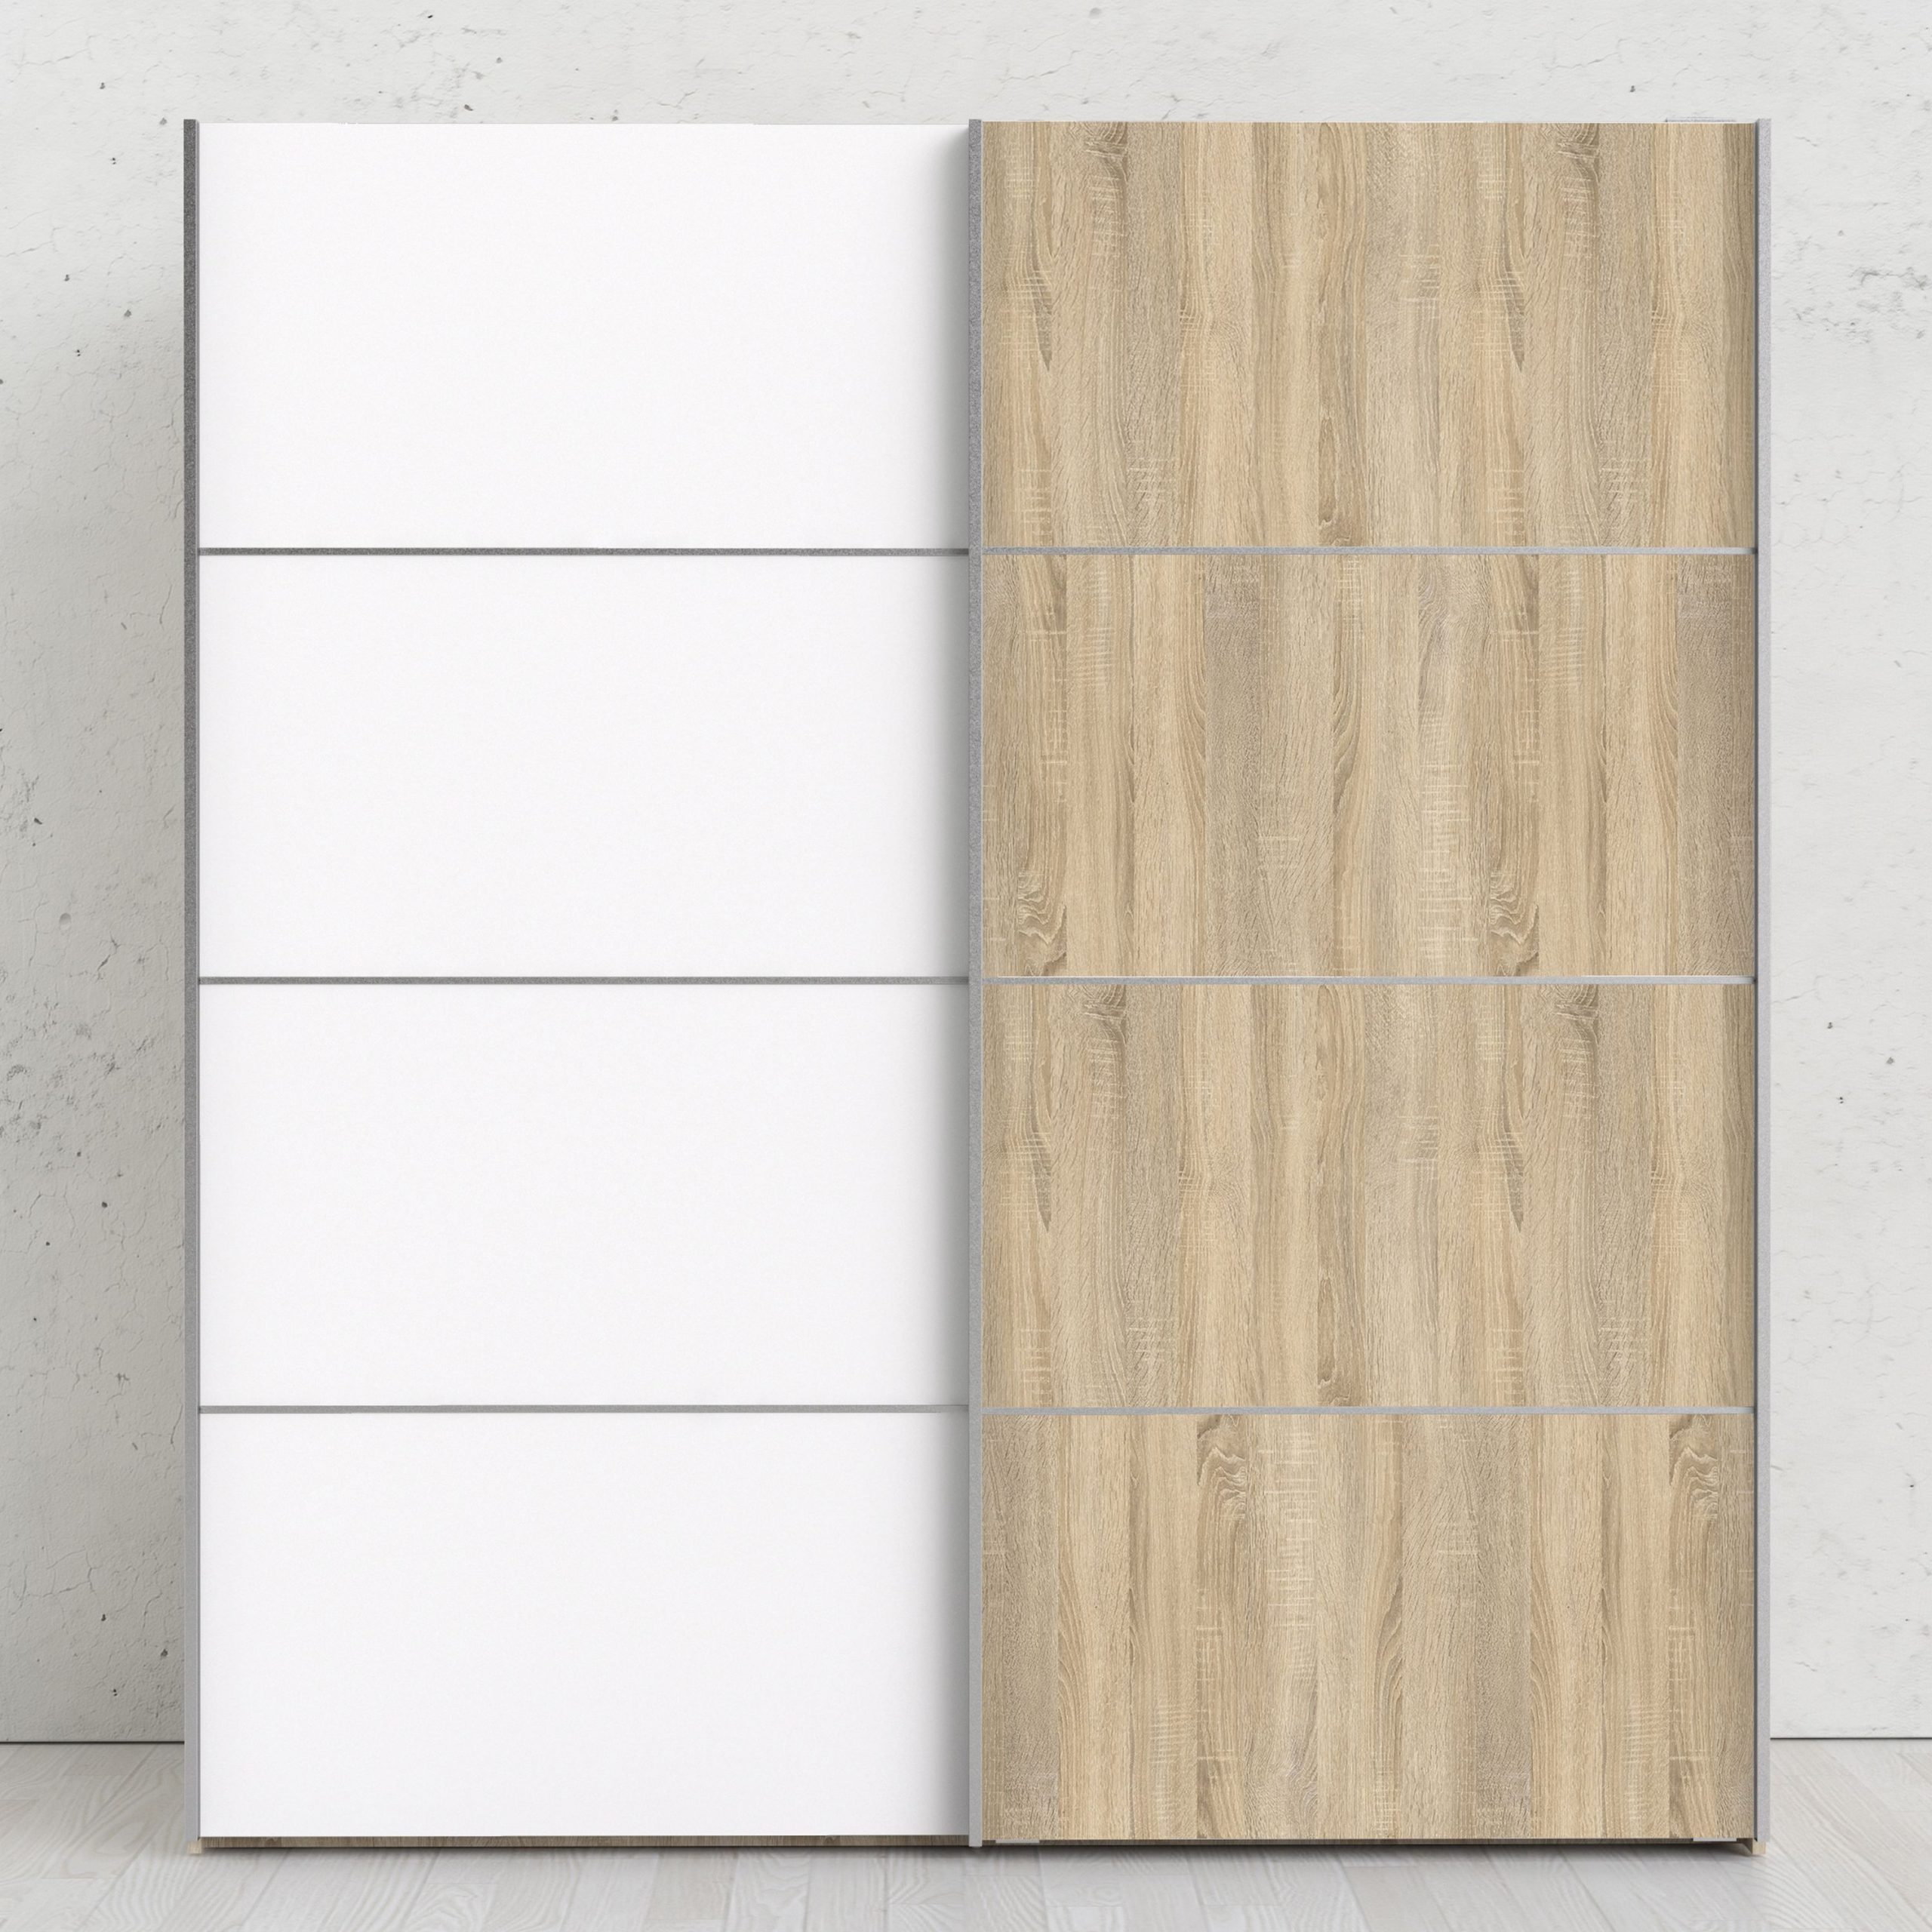 Verona Sliding Wardrobe 180cm In Oak With White And Oak Doors With 5 Shelves